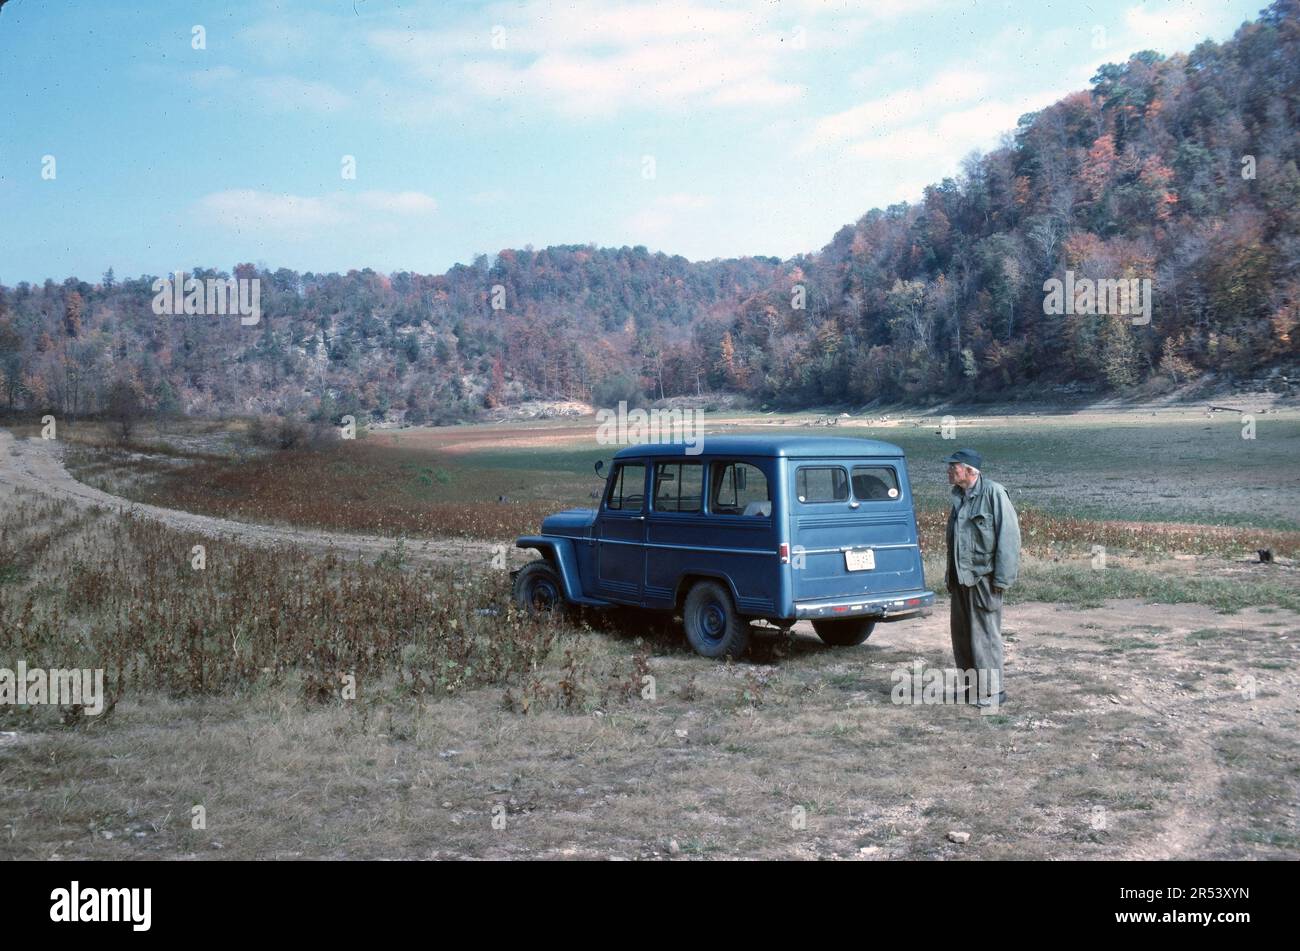 Willys Jeep Utility Wagon at Caney Creek, Kentucky, 1966. Man identified as Floyd S. Carpenter. Stock Photo